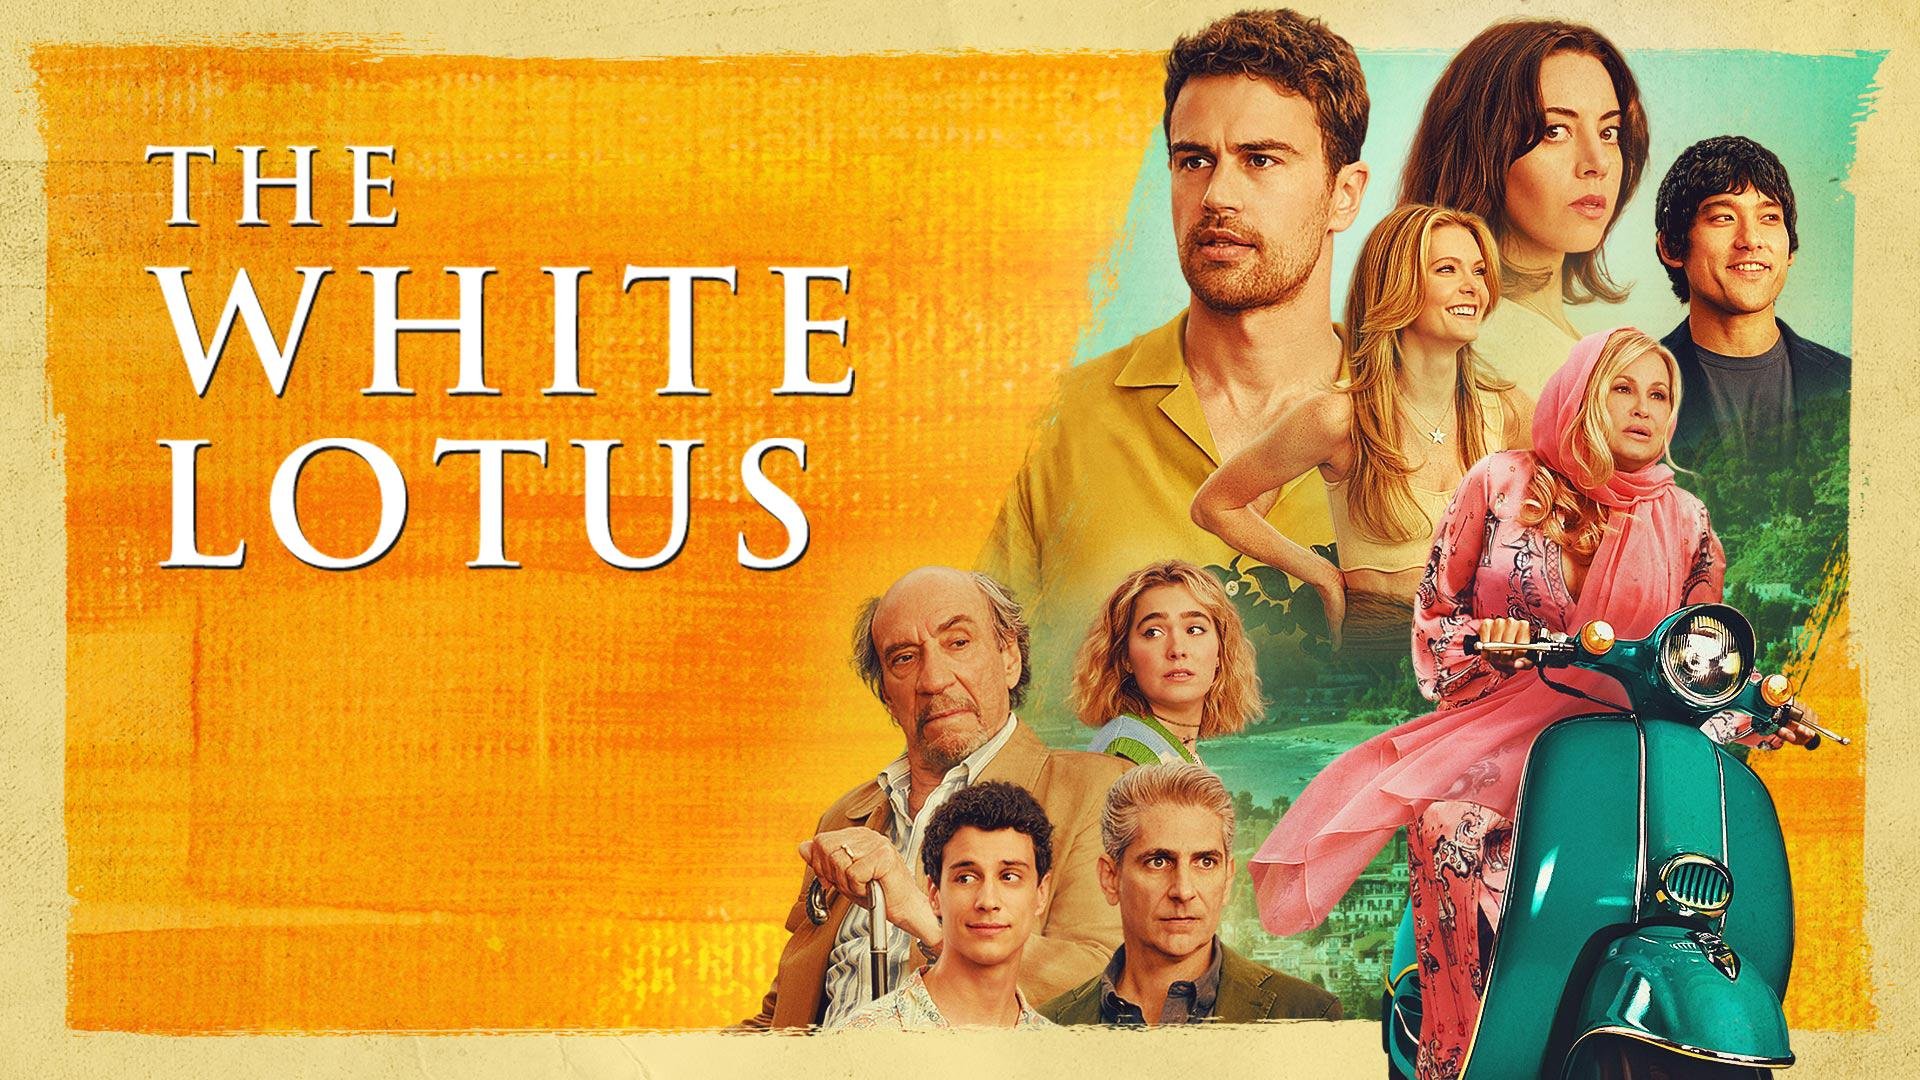 Watch The White Lotus Online - Stream Full Episodes